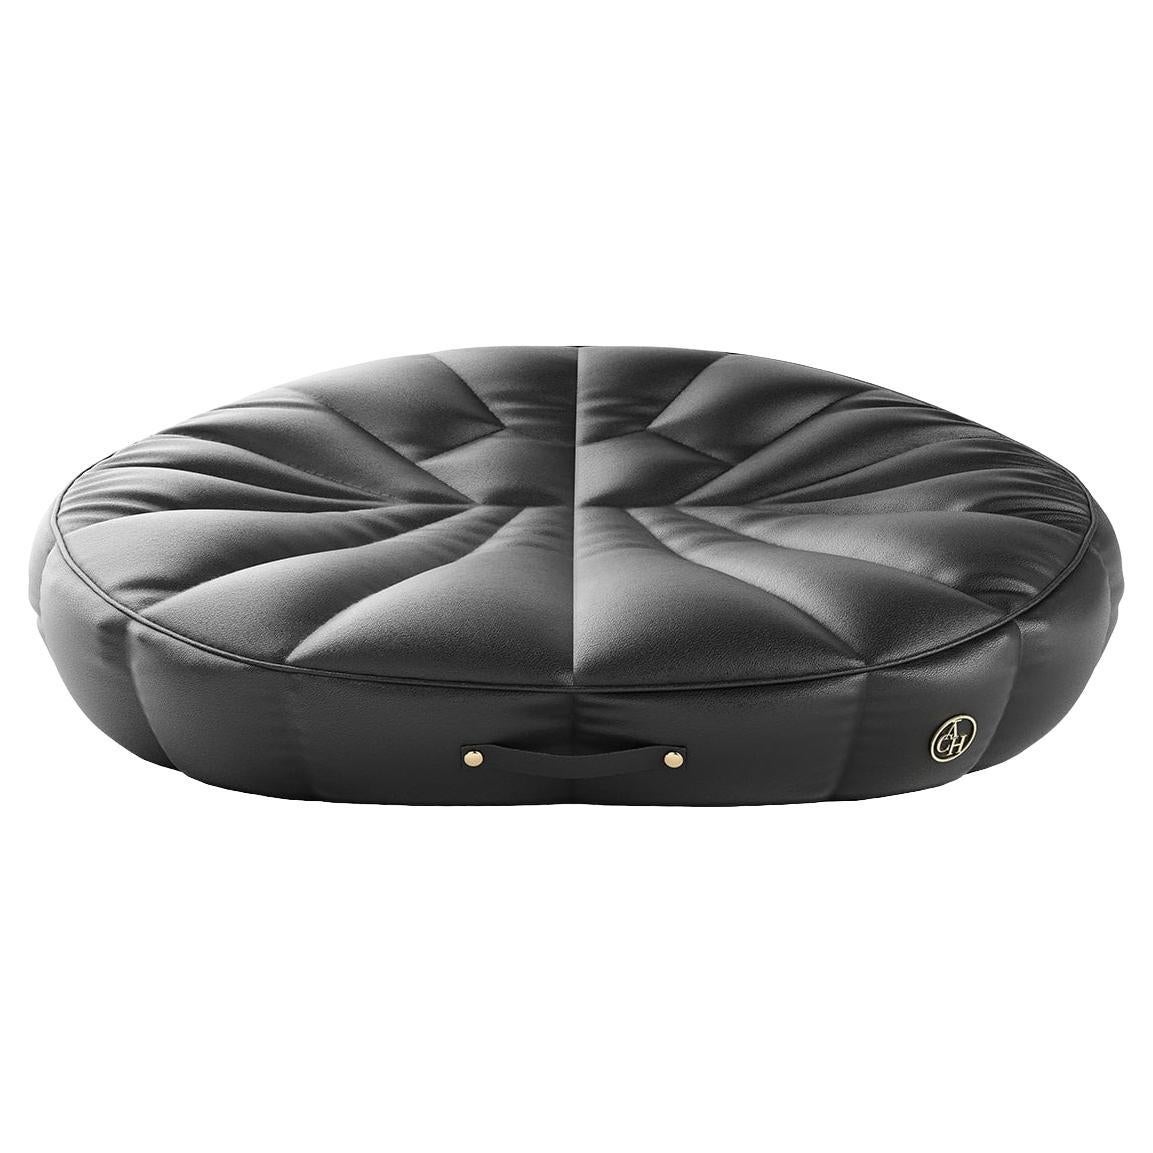 Large Black Modern Pet Bed, Vegan Leather Trendy Sofa for Dogs & Cats '2 Sizes' For Sale